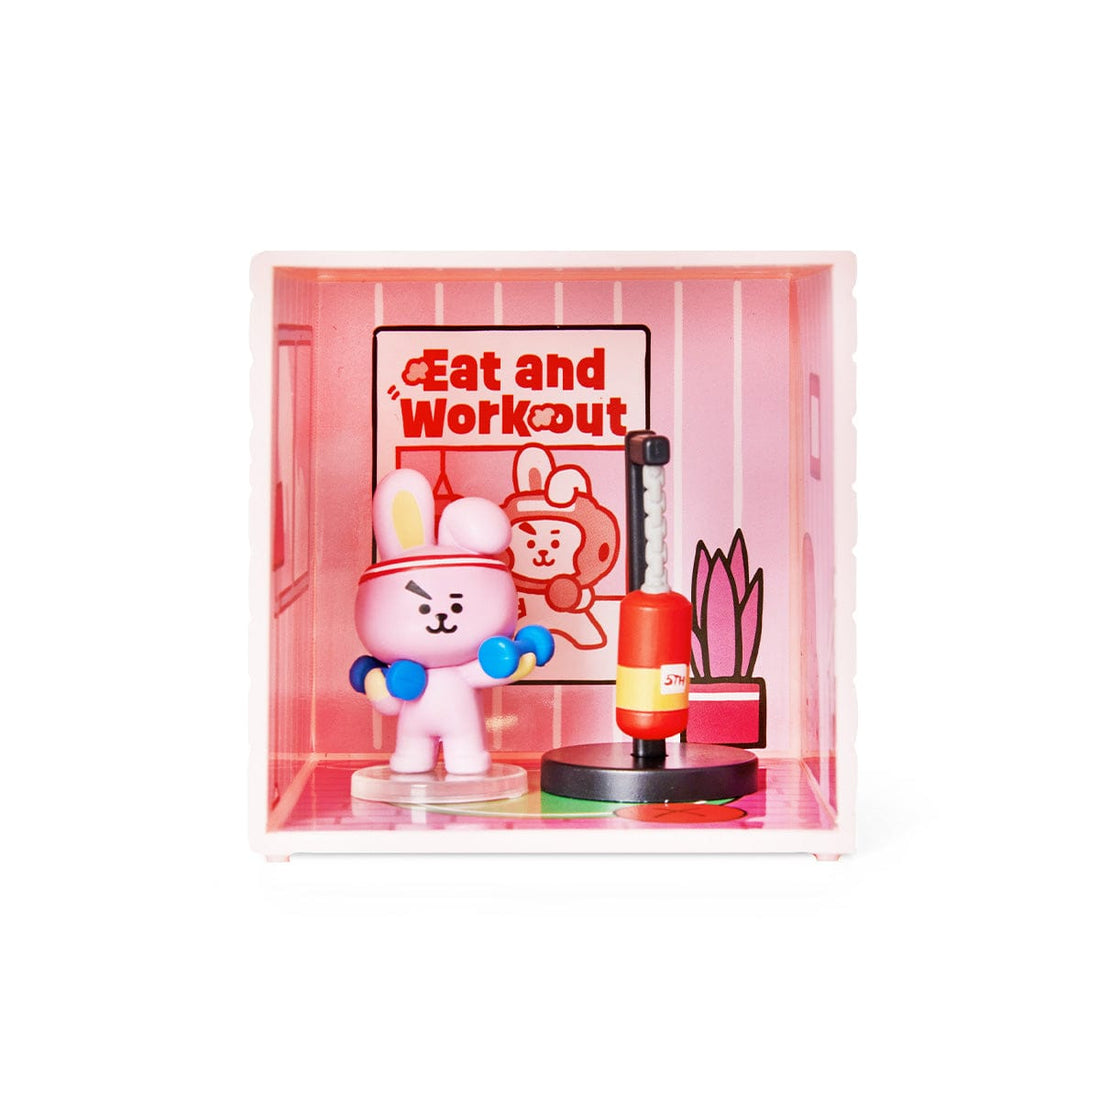 LINE FRIENDS LIVING COOKY BT21 COOKY 5 Years Anniversary MINI DOLLHOUSE FIGURINE